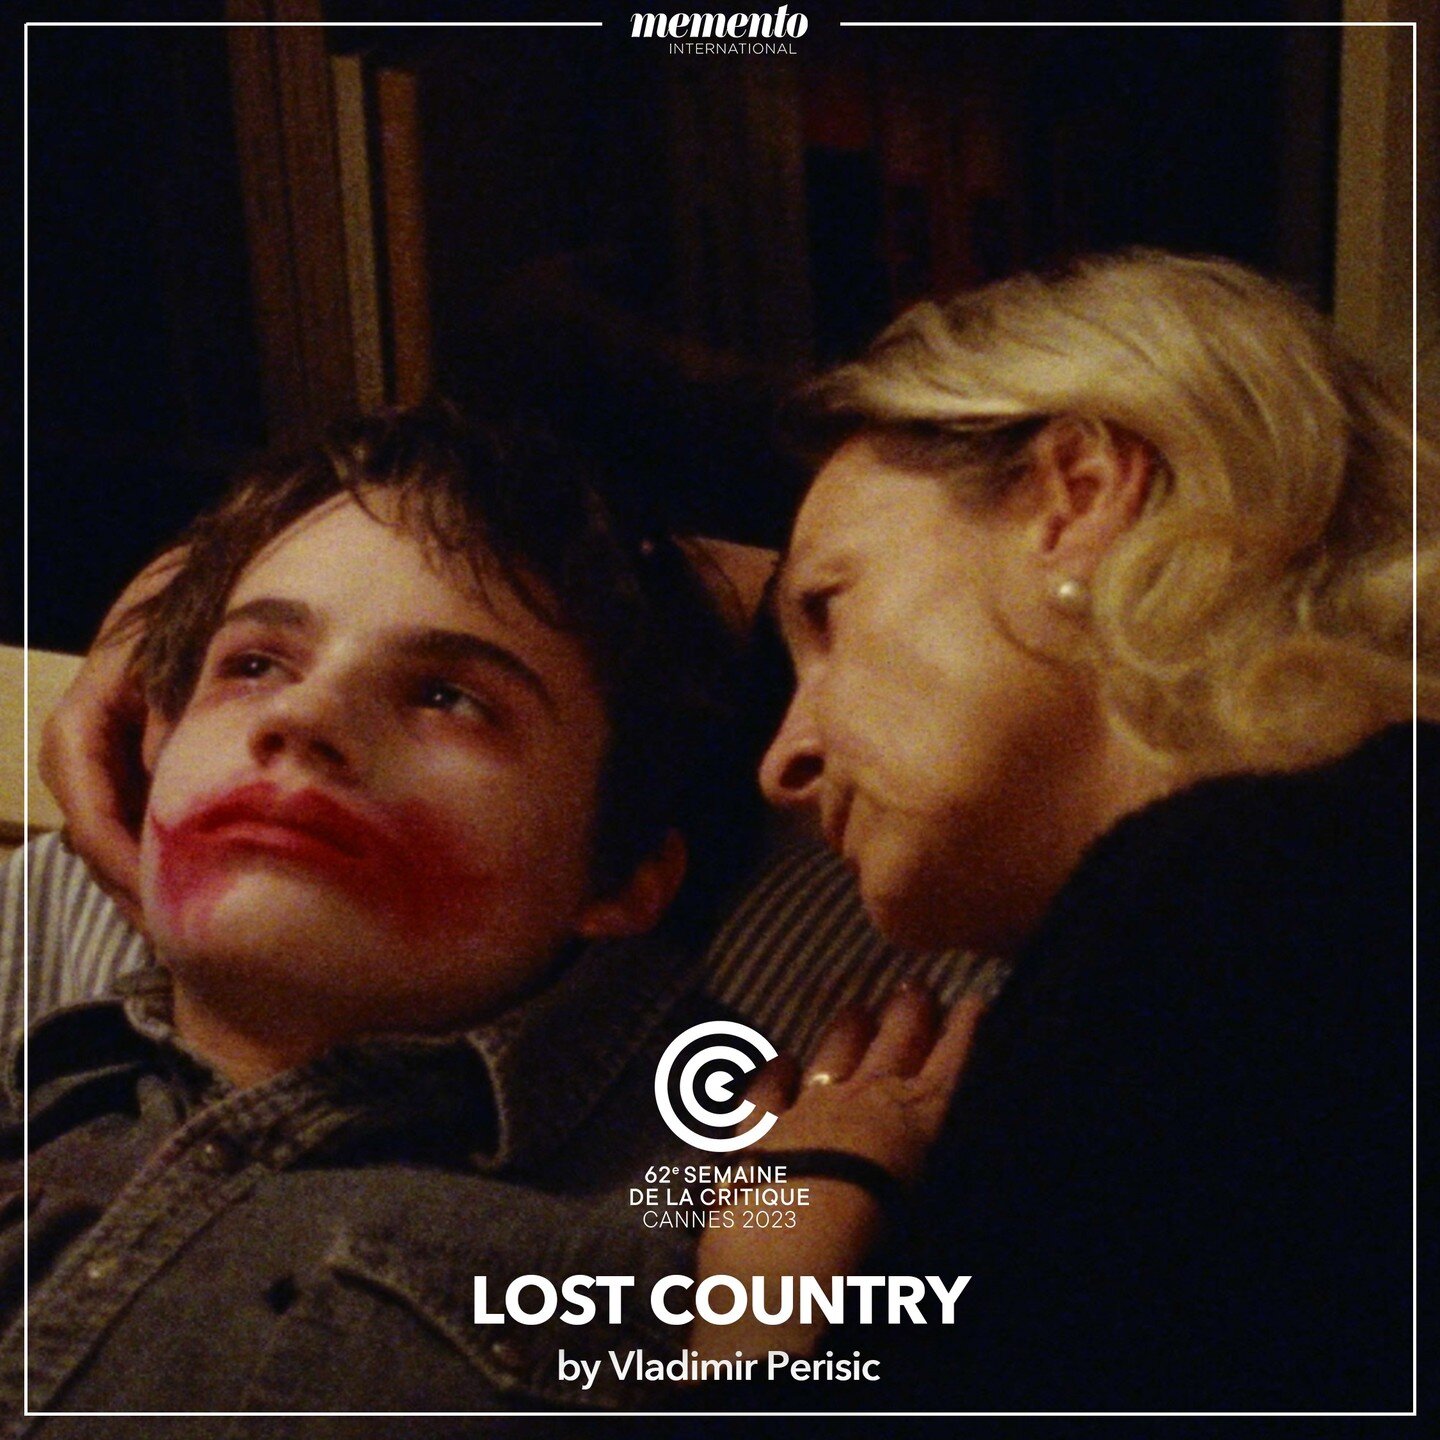 The news is out! We are so proud to announce that we will present Vladimir Perisič's sophomore feature LOST COUNTRY in Cannes in a few weeks! 🔥

@semaine_de_la_critique #vladimirperisic #lostcountry #cannes2023 @easyridersfilms @kinoelektron #critic